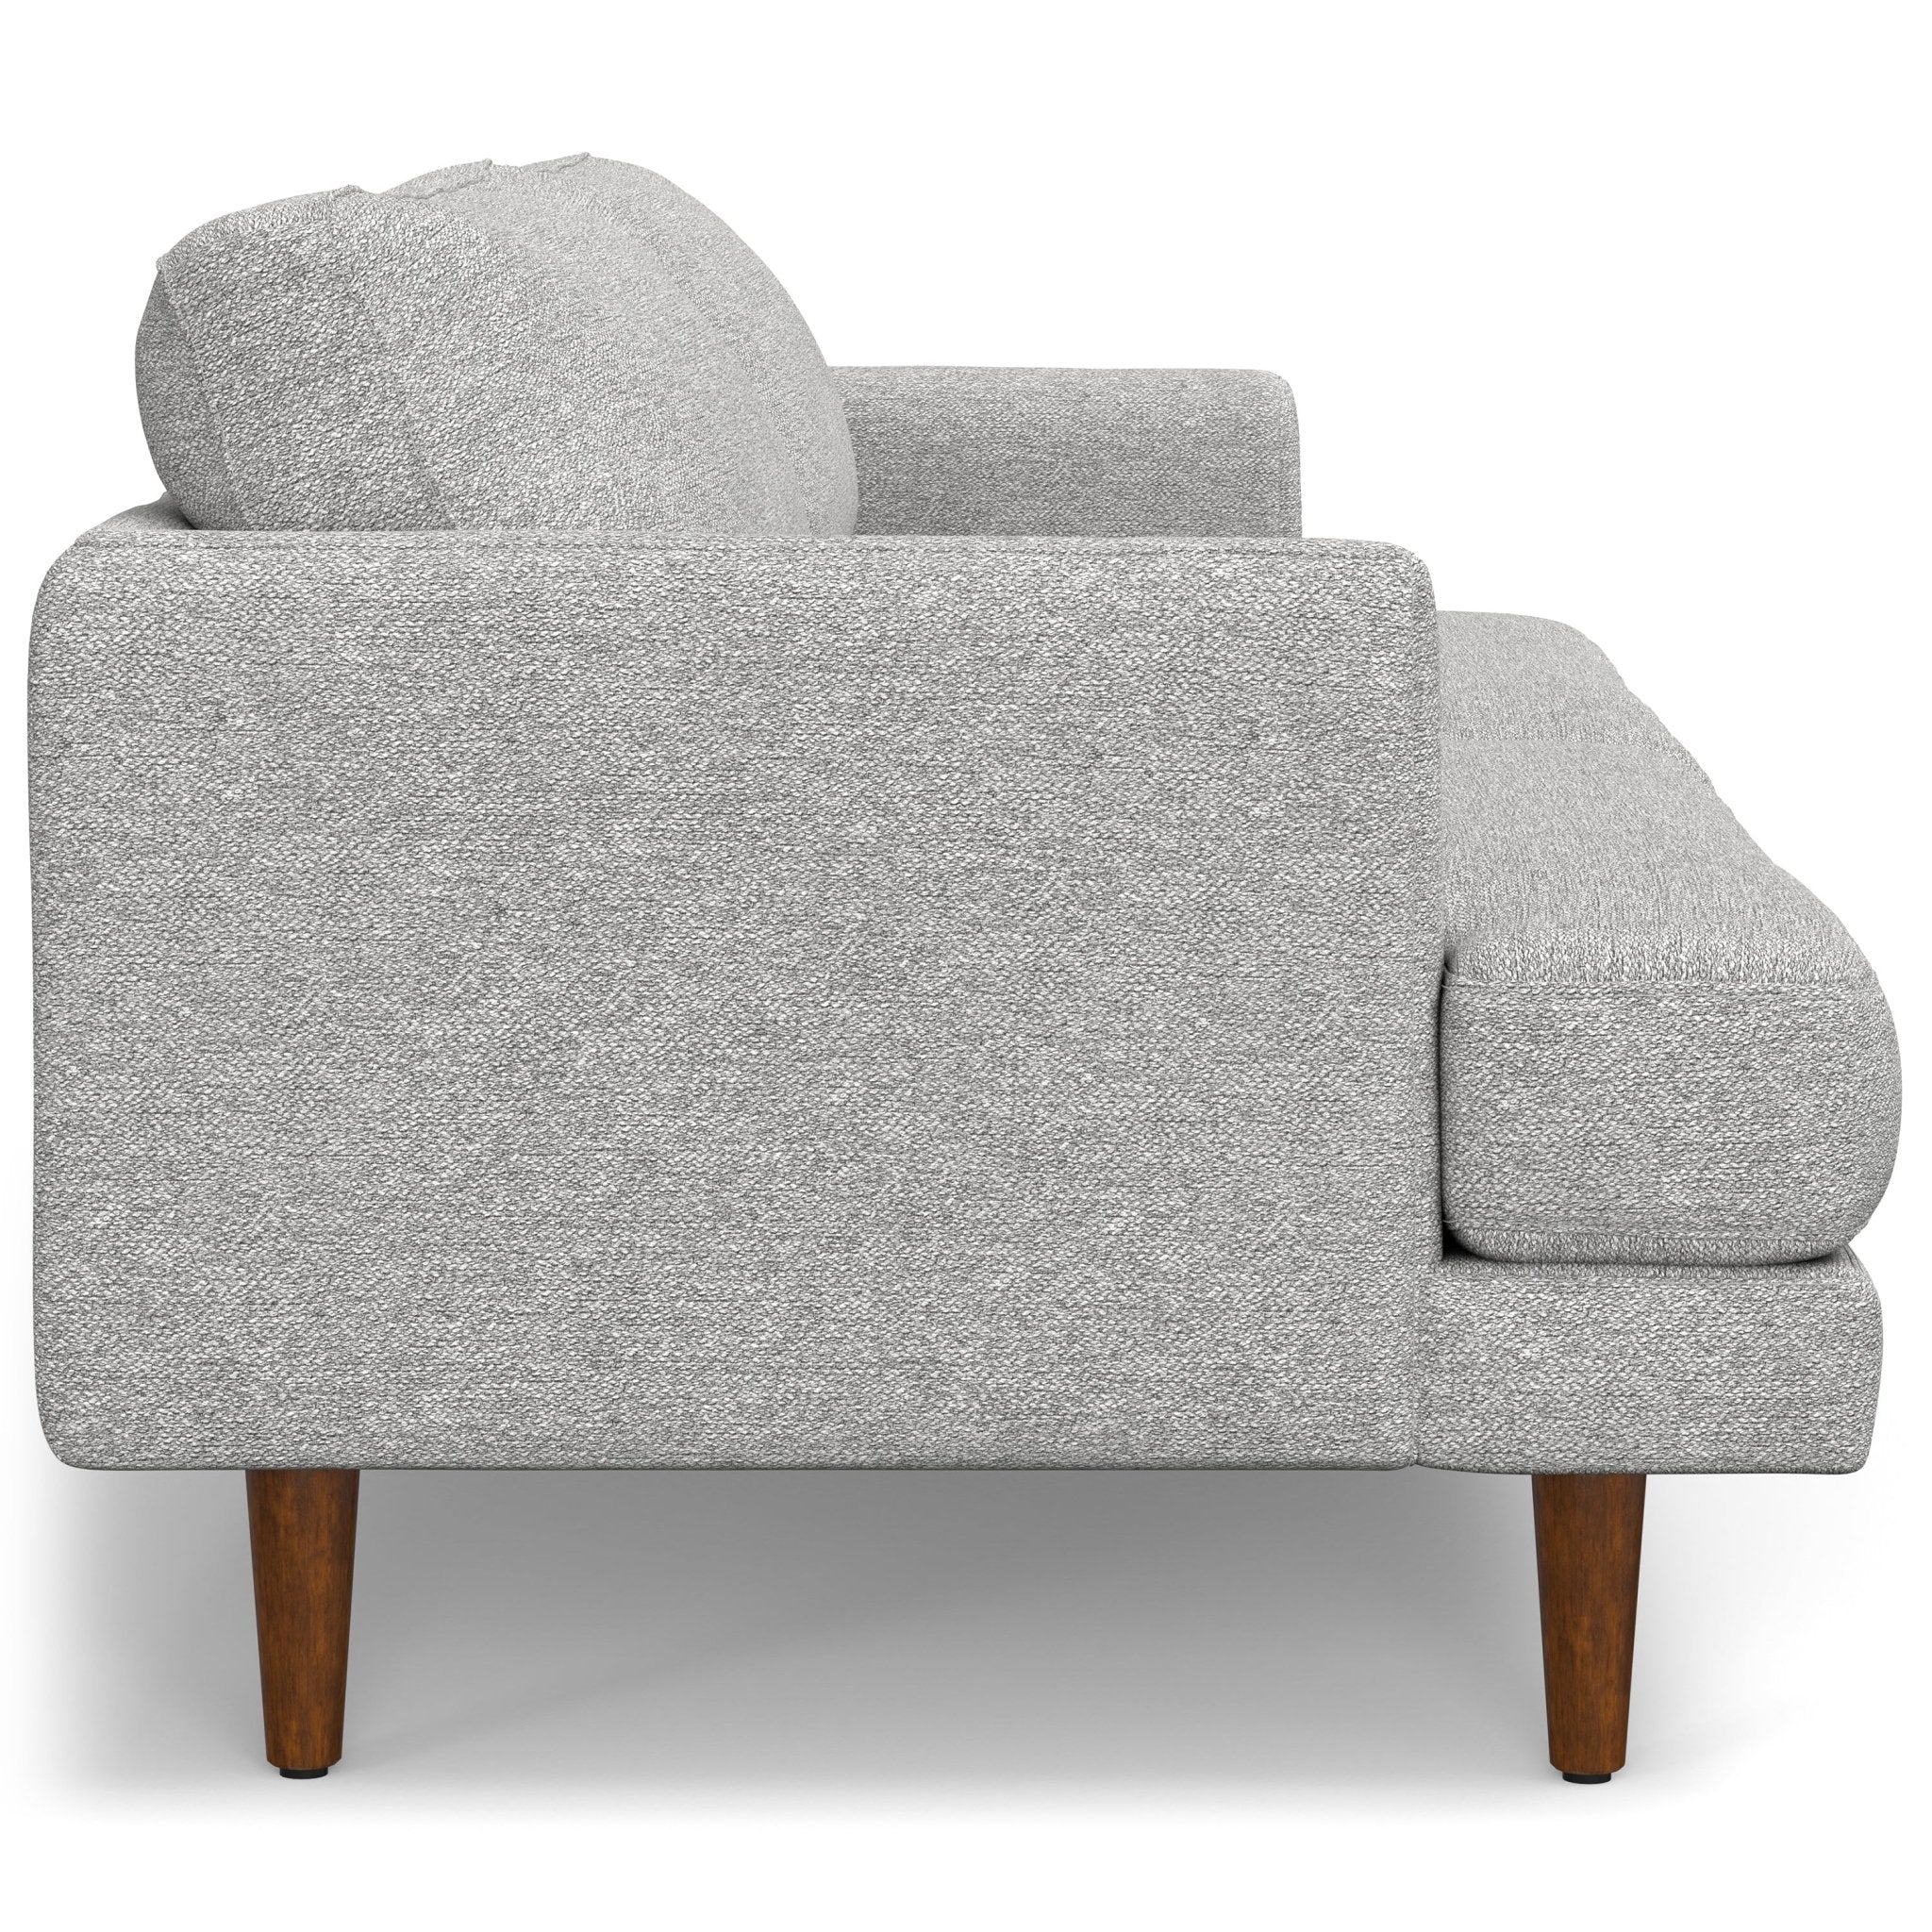 Melodica Upholstered Sofa with Loose Back and Seat Cushion Thickness - Sofas